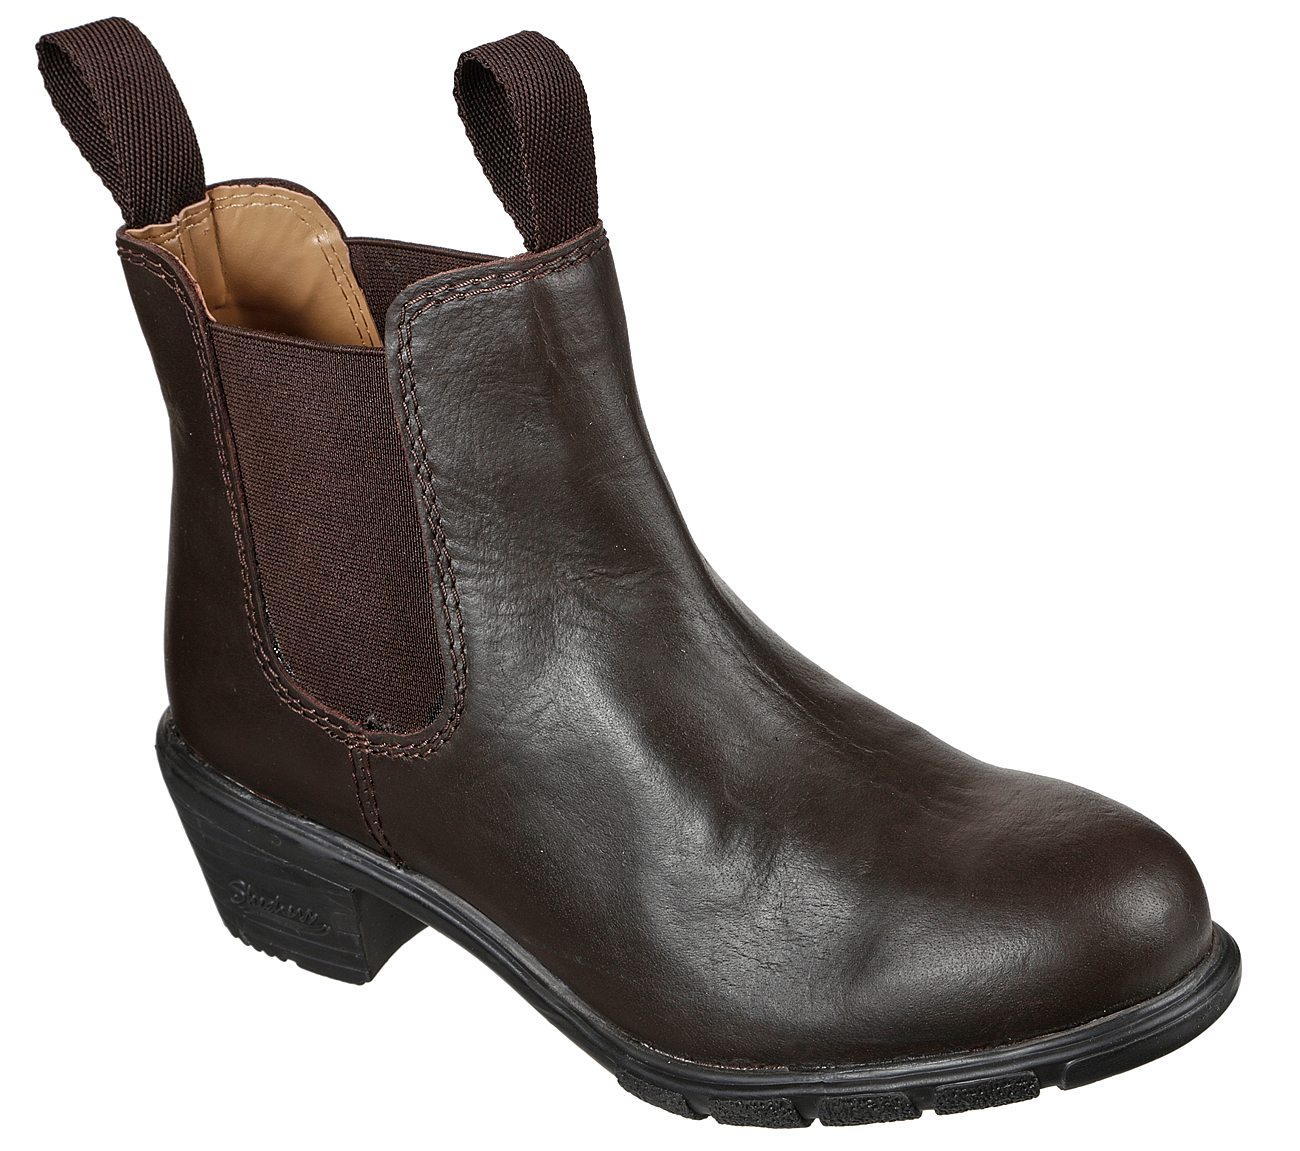 skechers casual chelsea boots